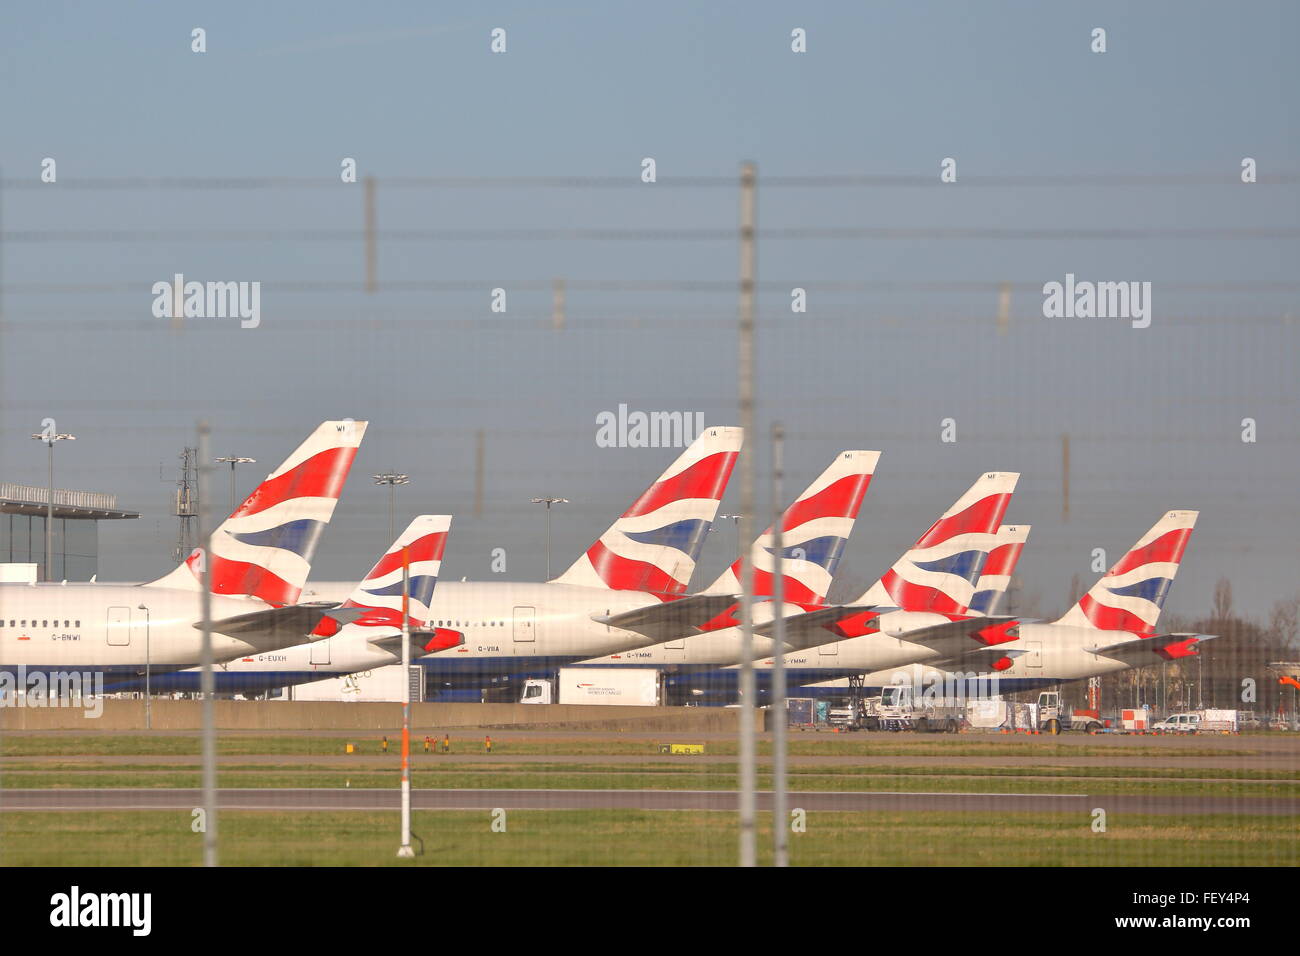 British Airways planes parked at the gate at London Heathrow Airport, UK Stock Photo